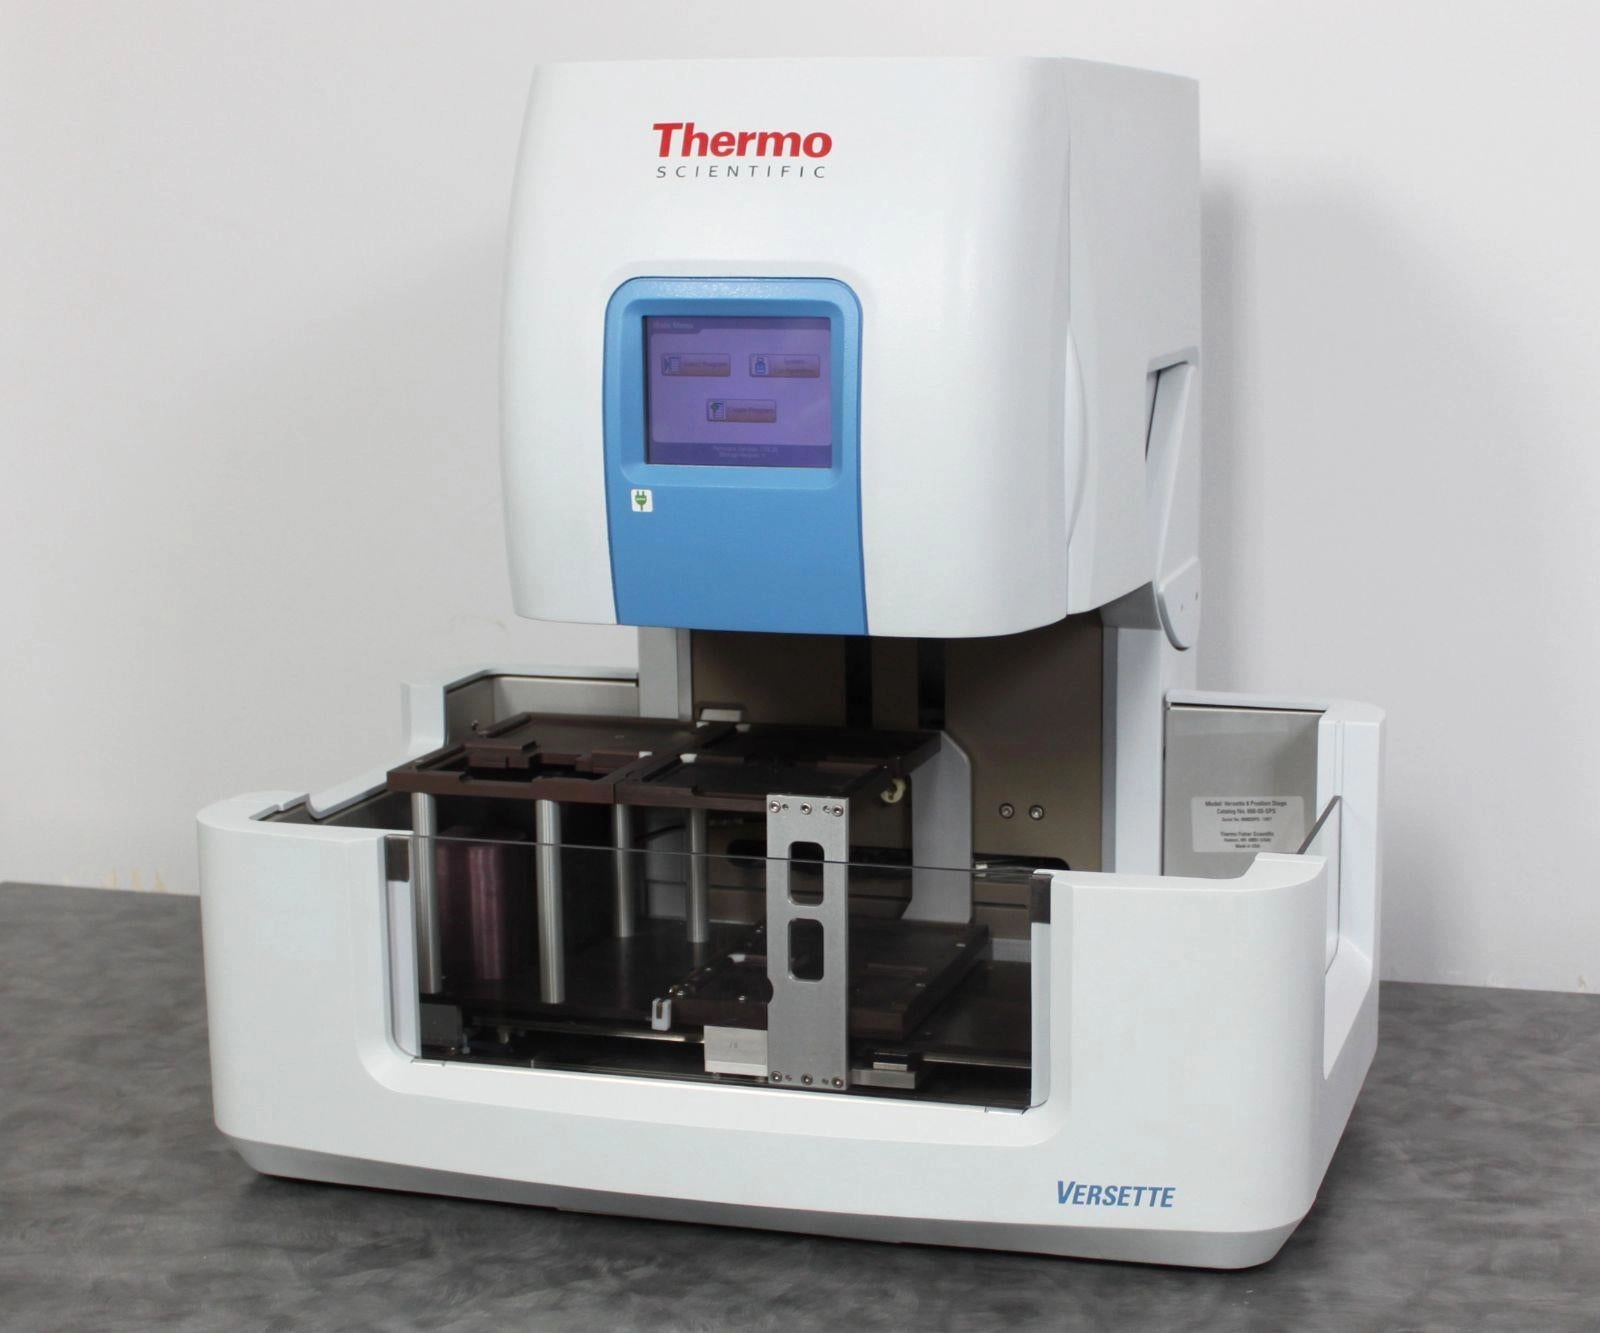 Thermo Scientific Versette Liquid Handler Base Unit 650-01-BS &amp; 6 Position Stage